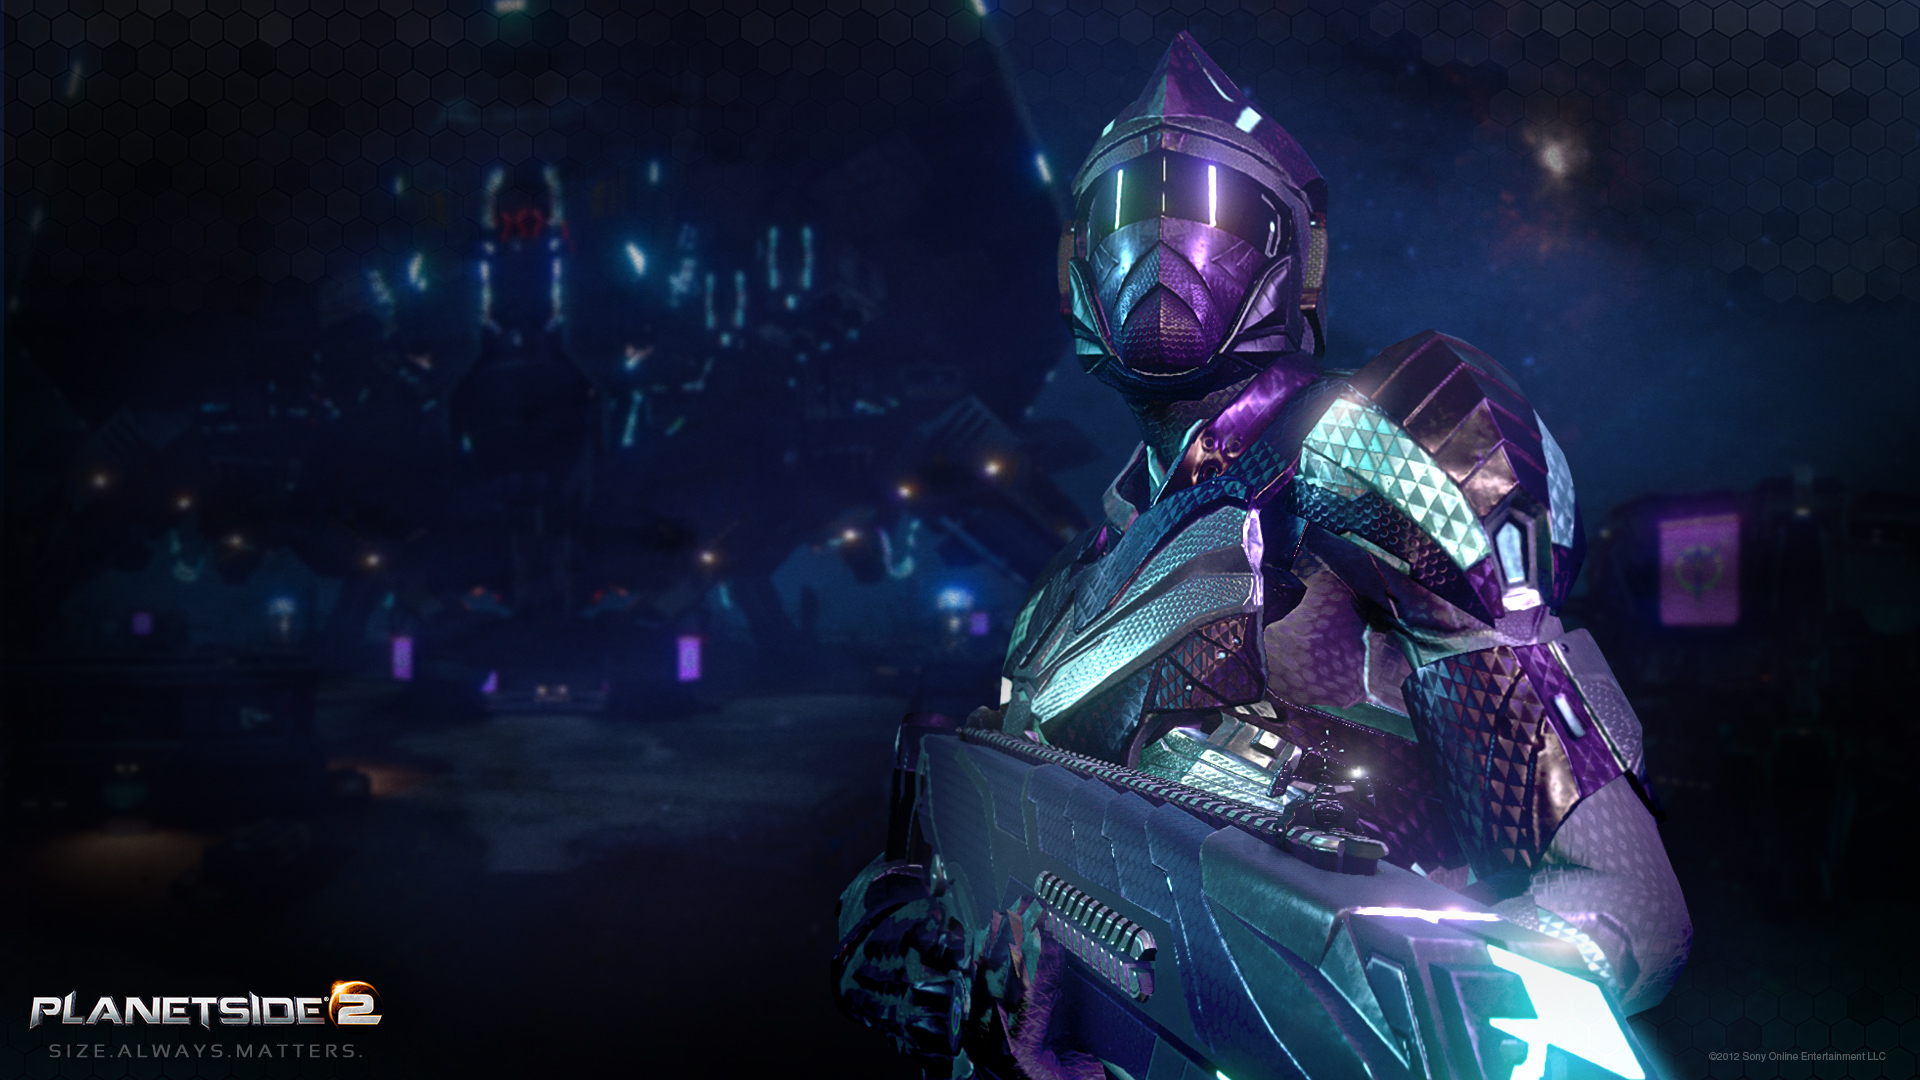 collection of best Planetside HD wallpaper